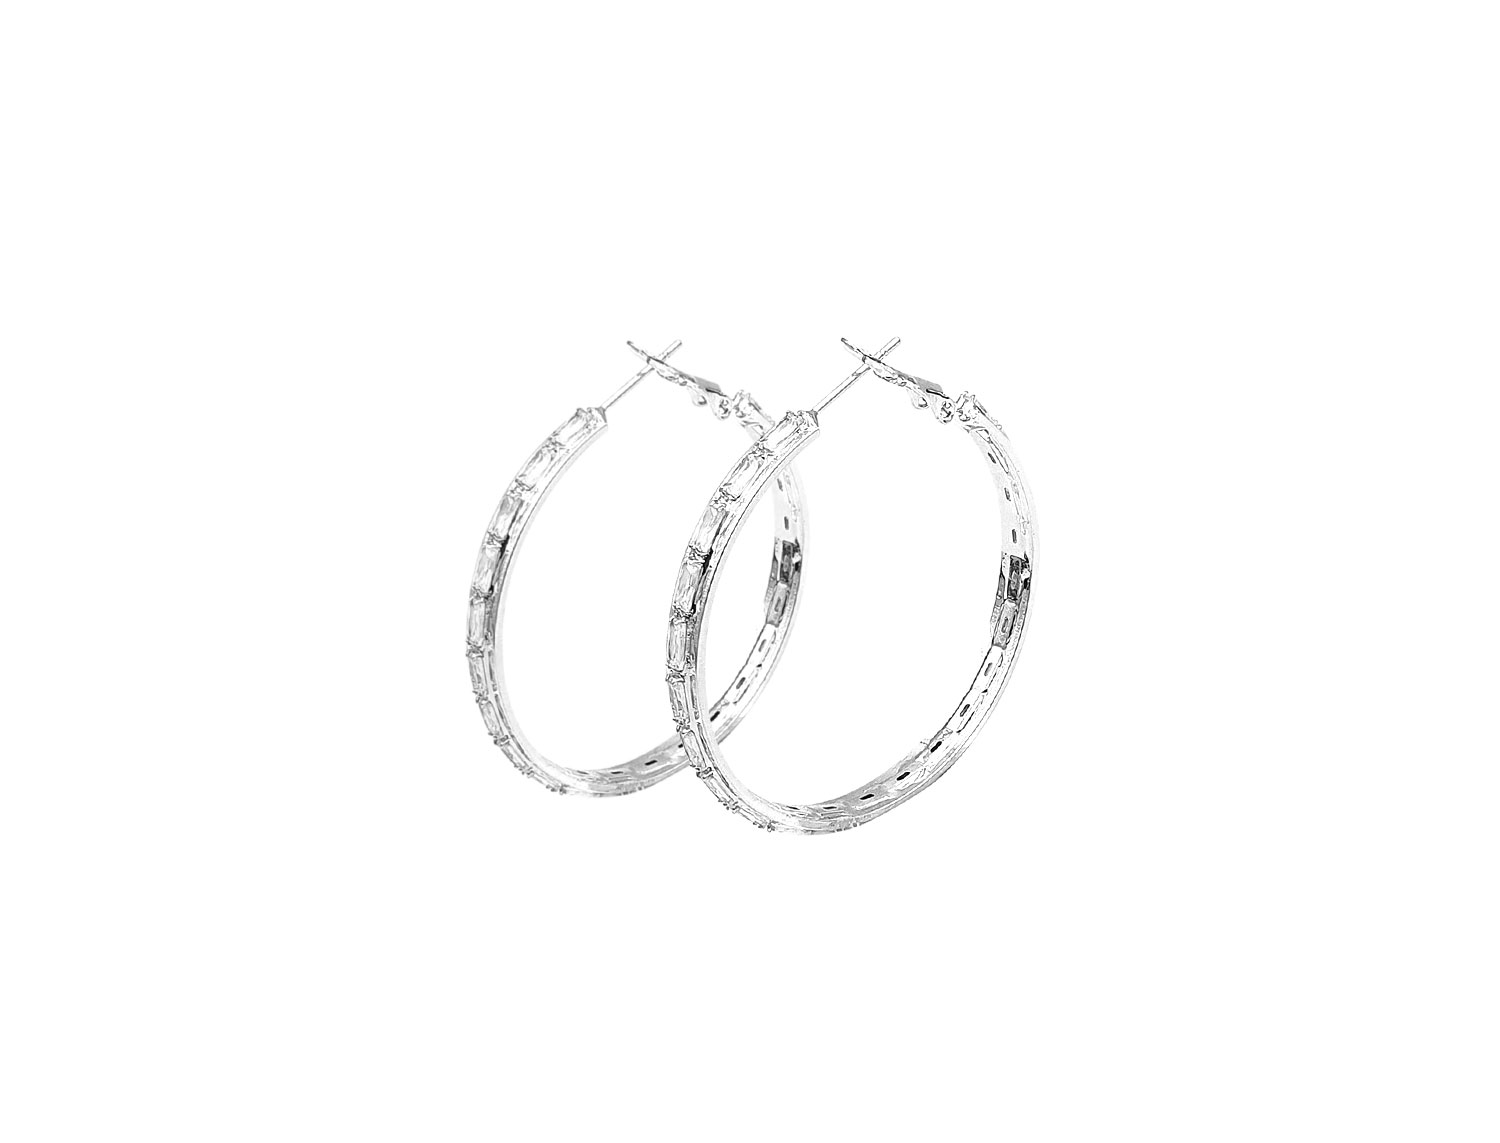 Make a sparkling statement wherever you go with this 4cm Sparkling Diamond Big Hoop Earrings Silver Plated ! This Light weight Earrings are both eye-catching and comfortable to wear.
Stone type Cubic Zirconia stone